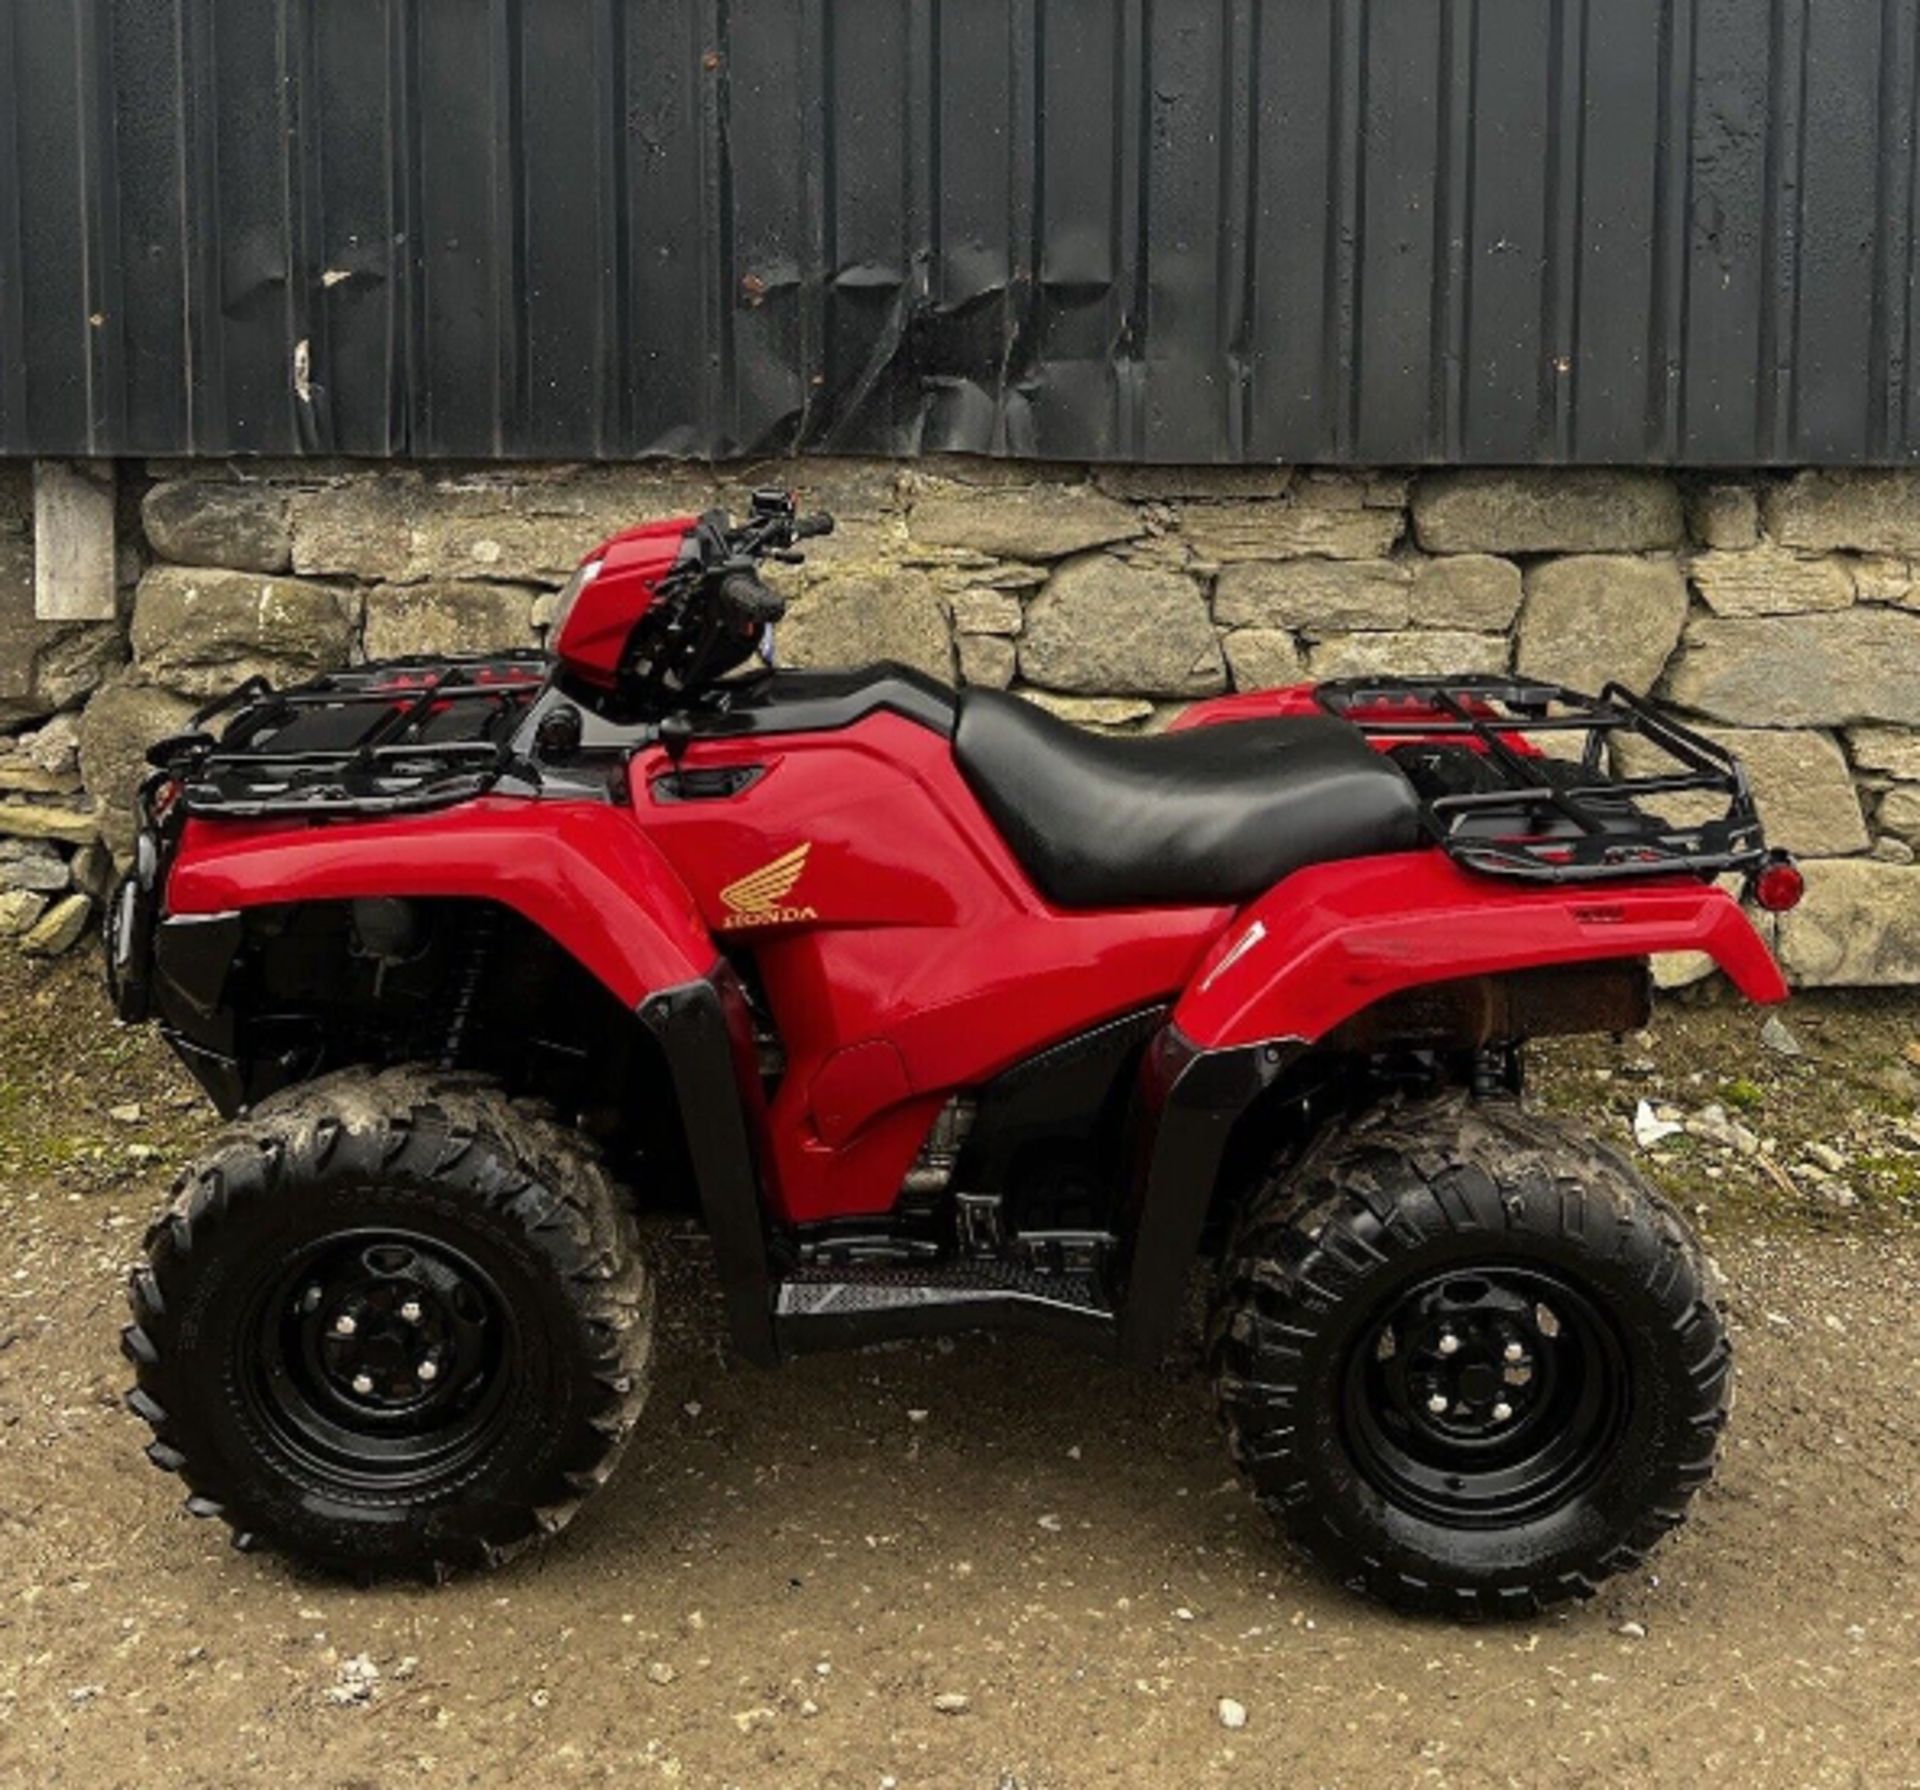 EPS PIONEER: HONDA TRX 500 FE QUAD WITH ELECTRIC POWER STEERING - Image 2 of 8